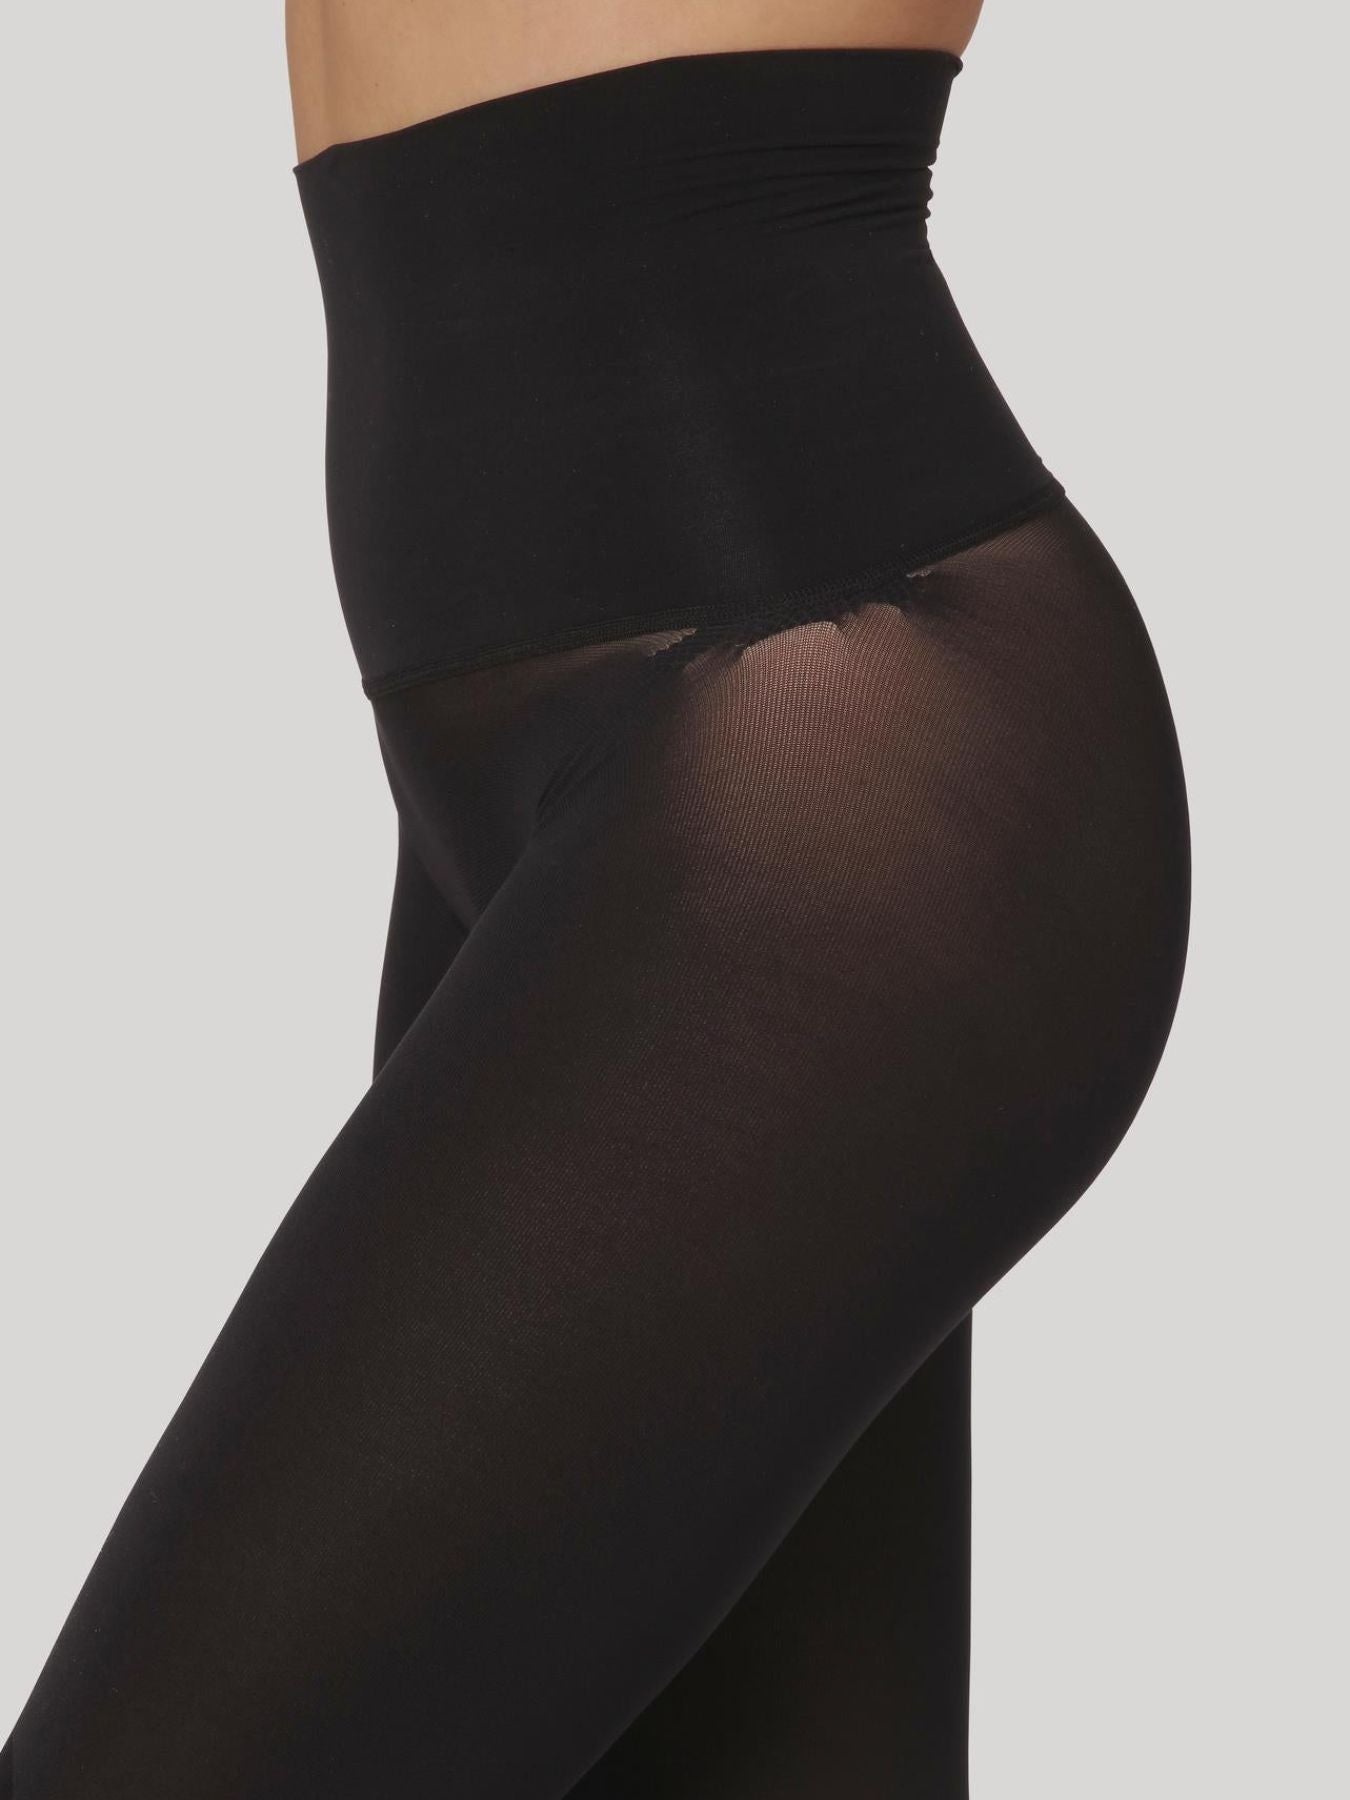 Dear Denier Simone Cashmere Blend Sustainable Tights - Tights from